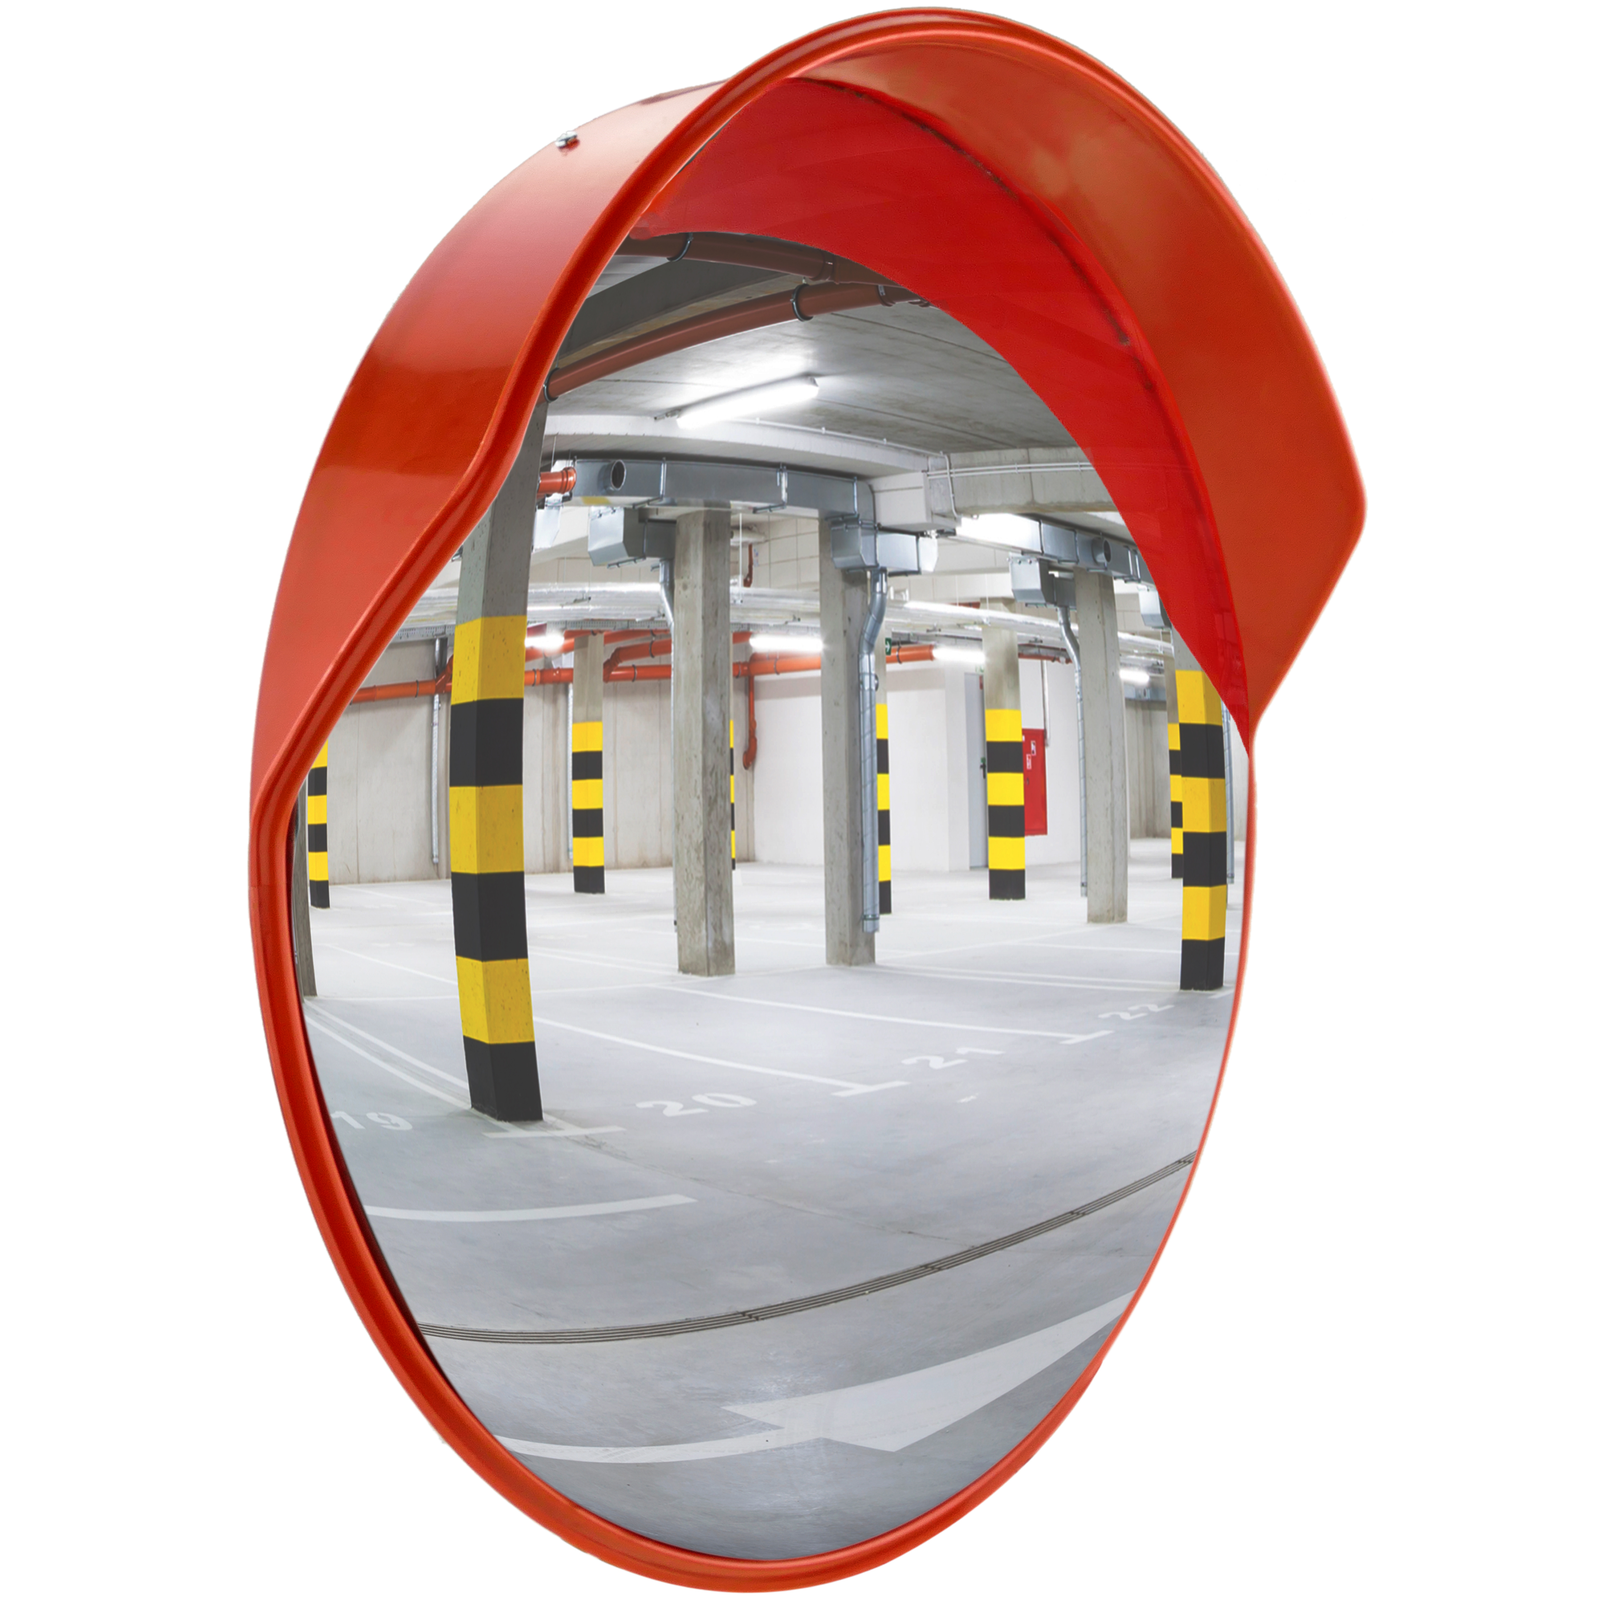 Convex traffic mirror safety security surveillance 60 cm - Cablematic